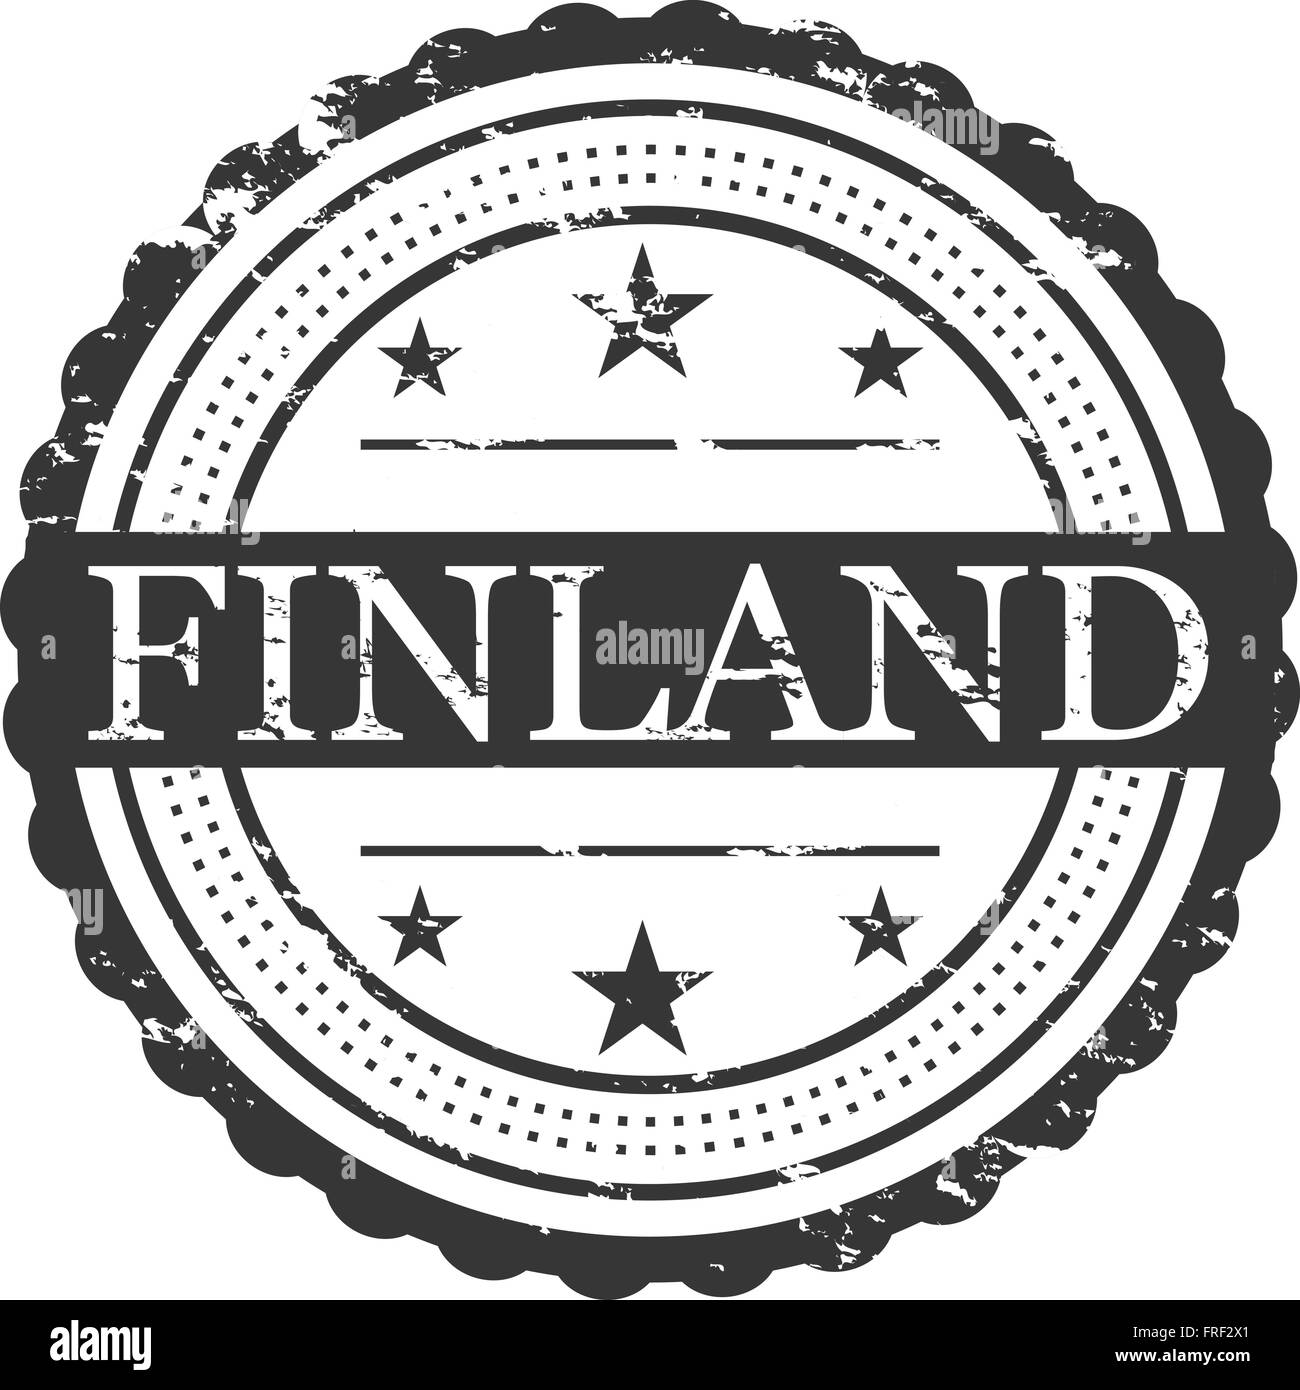 Finland Country Badge Stamp Stock Vector